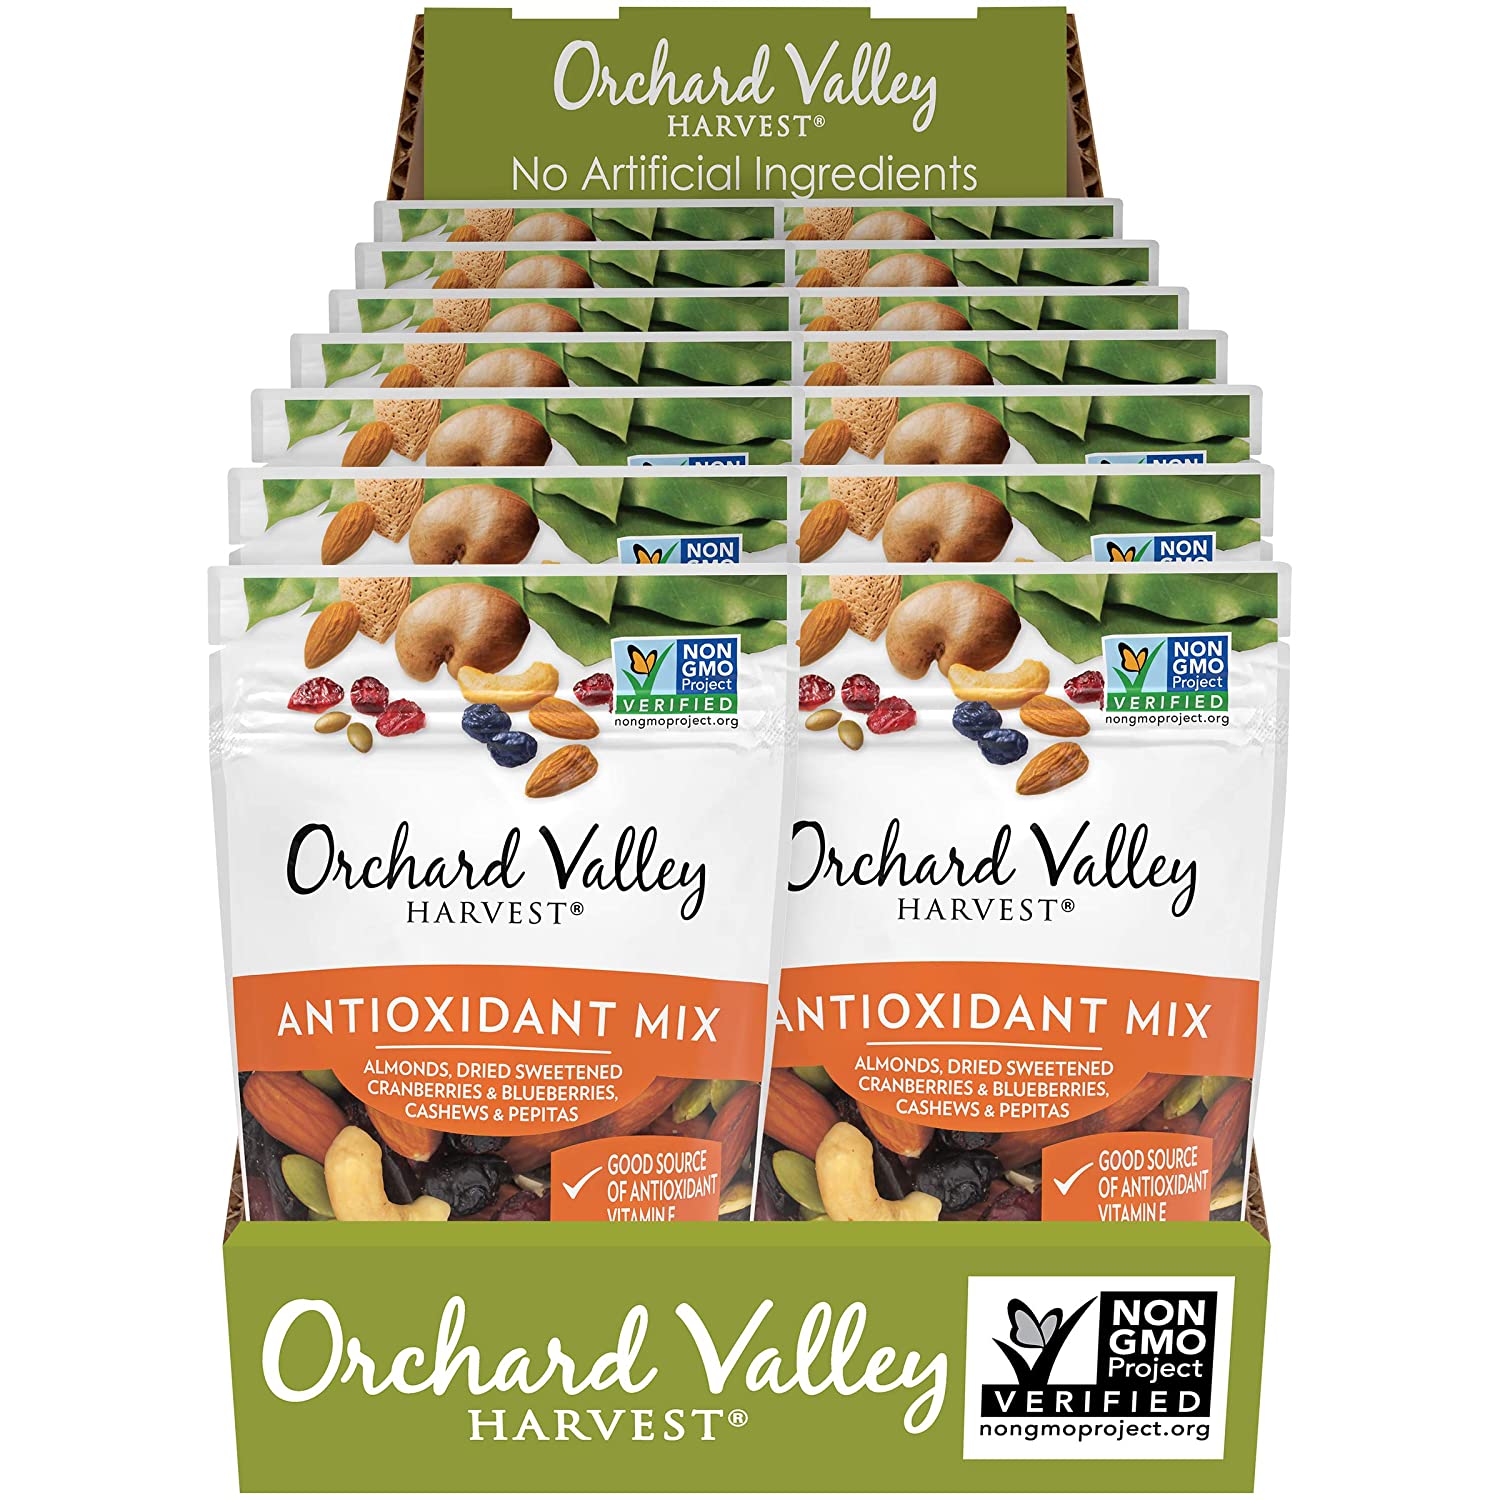 Orchard Valley Harvest Antioxidant Mix Orchard Valley Harvest Antioxidant Mix 2 Oz-14 Count 